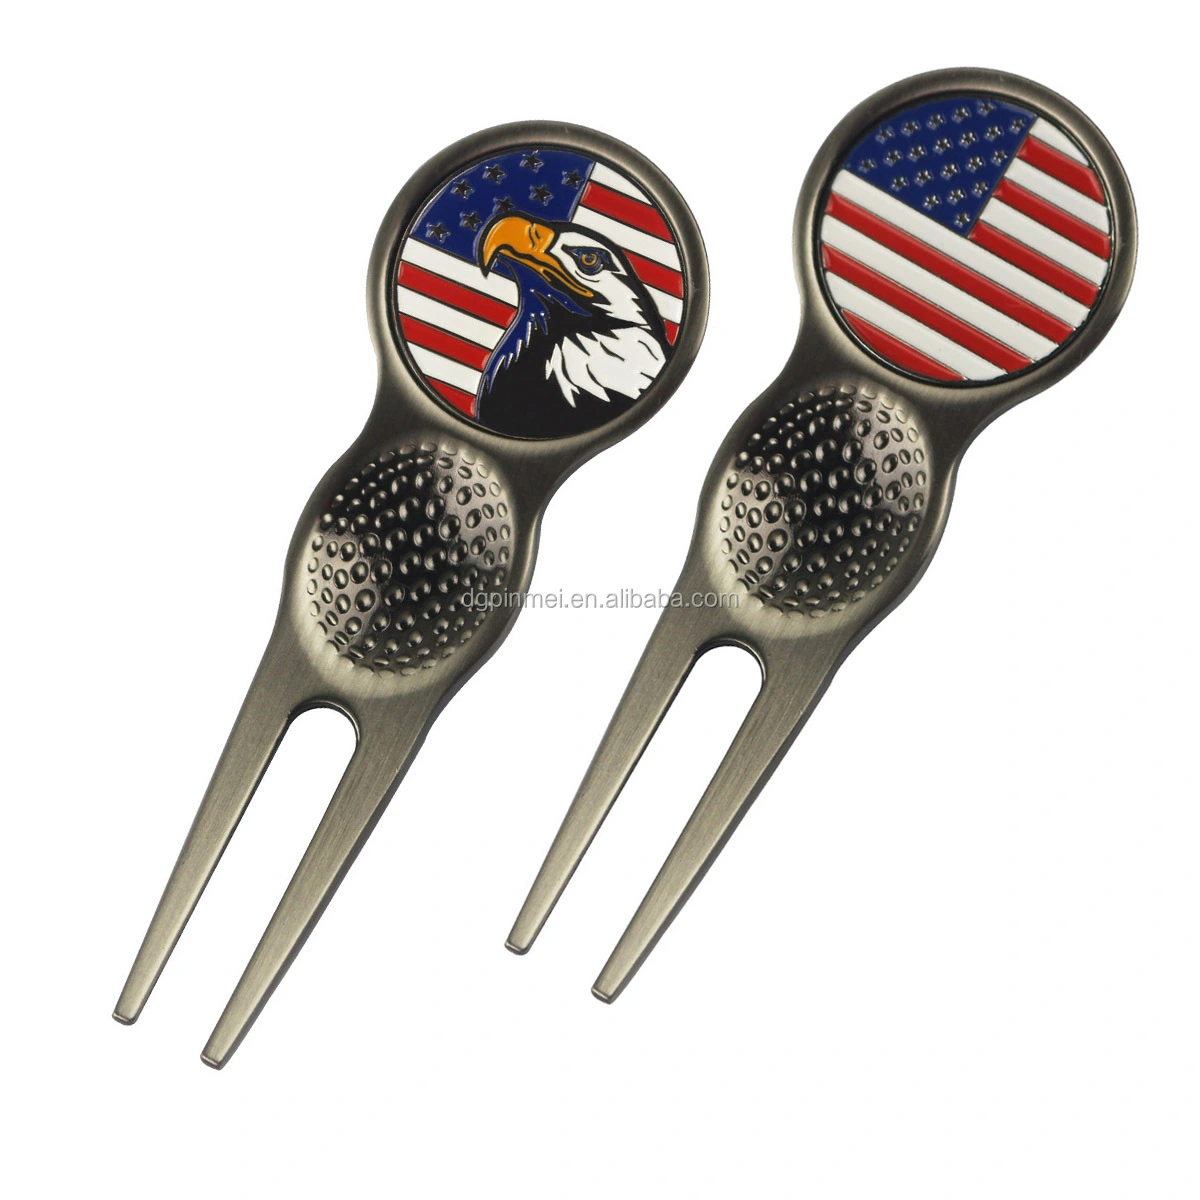 Personalized Customized Golf Divot Repair Tool Golf Divot Tool With Golf Ball Marker